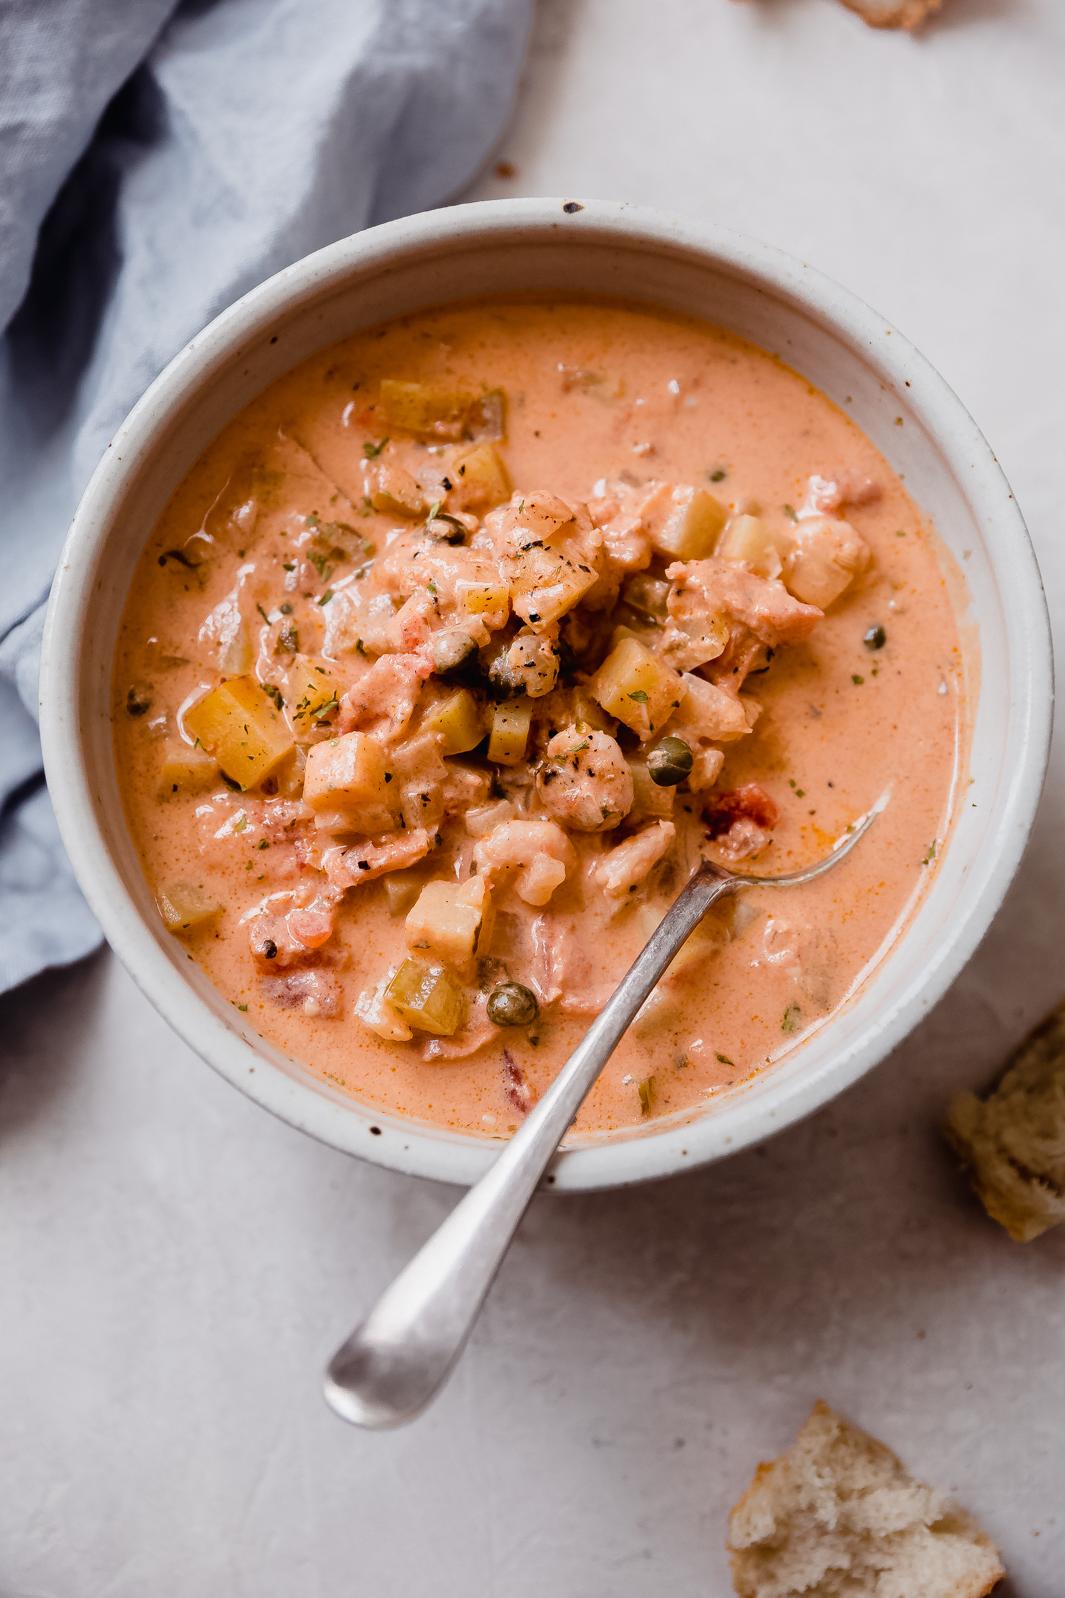  Warm up on a chilly day with a comforting bowl of chowder.